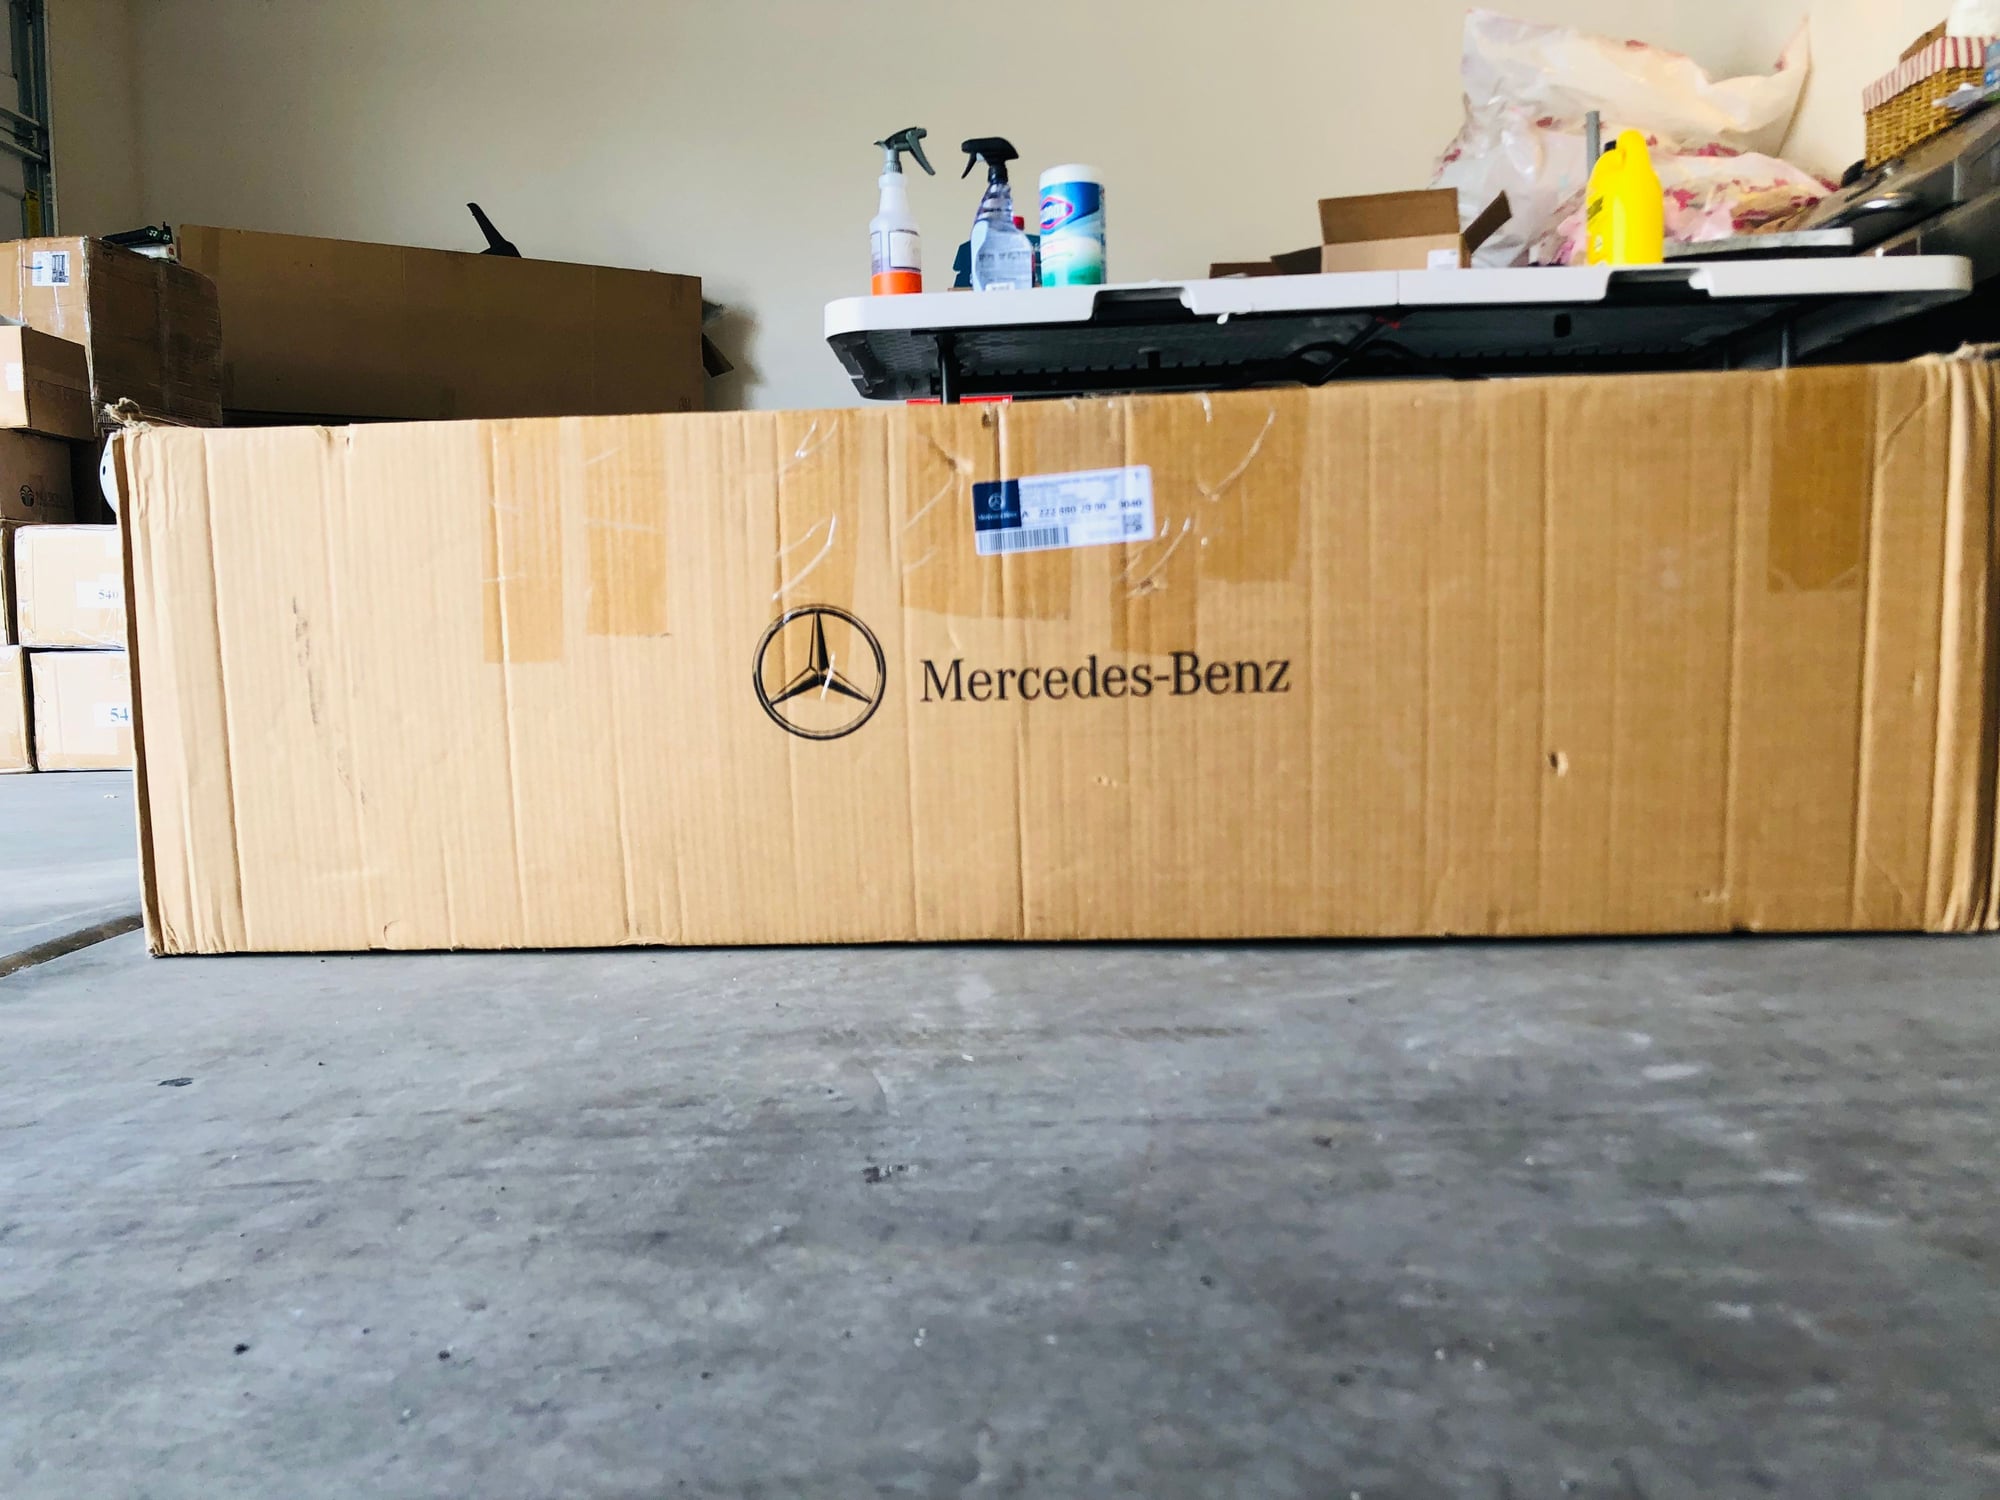 Exterior Body Parts - Mercedes OEM +2018 W222 Sedan S Class Front Grille - New - 2014 to 2020 Mercedes-Benz S63 AMG - Daimond Bar, CA 91765, United States